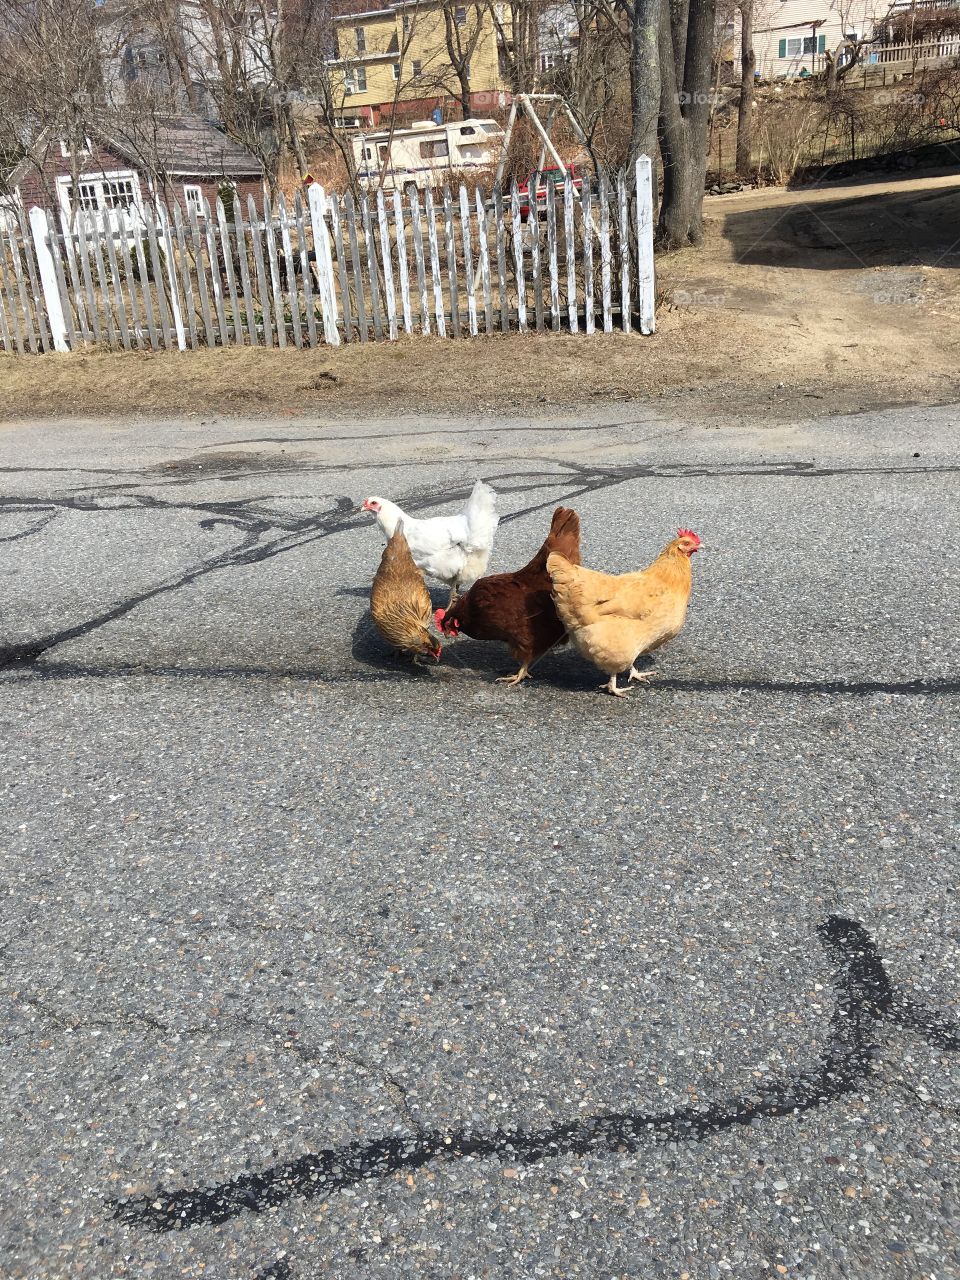 Chickens on the loose